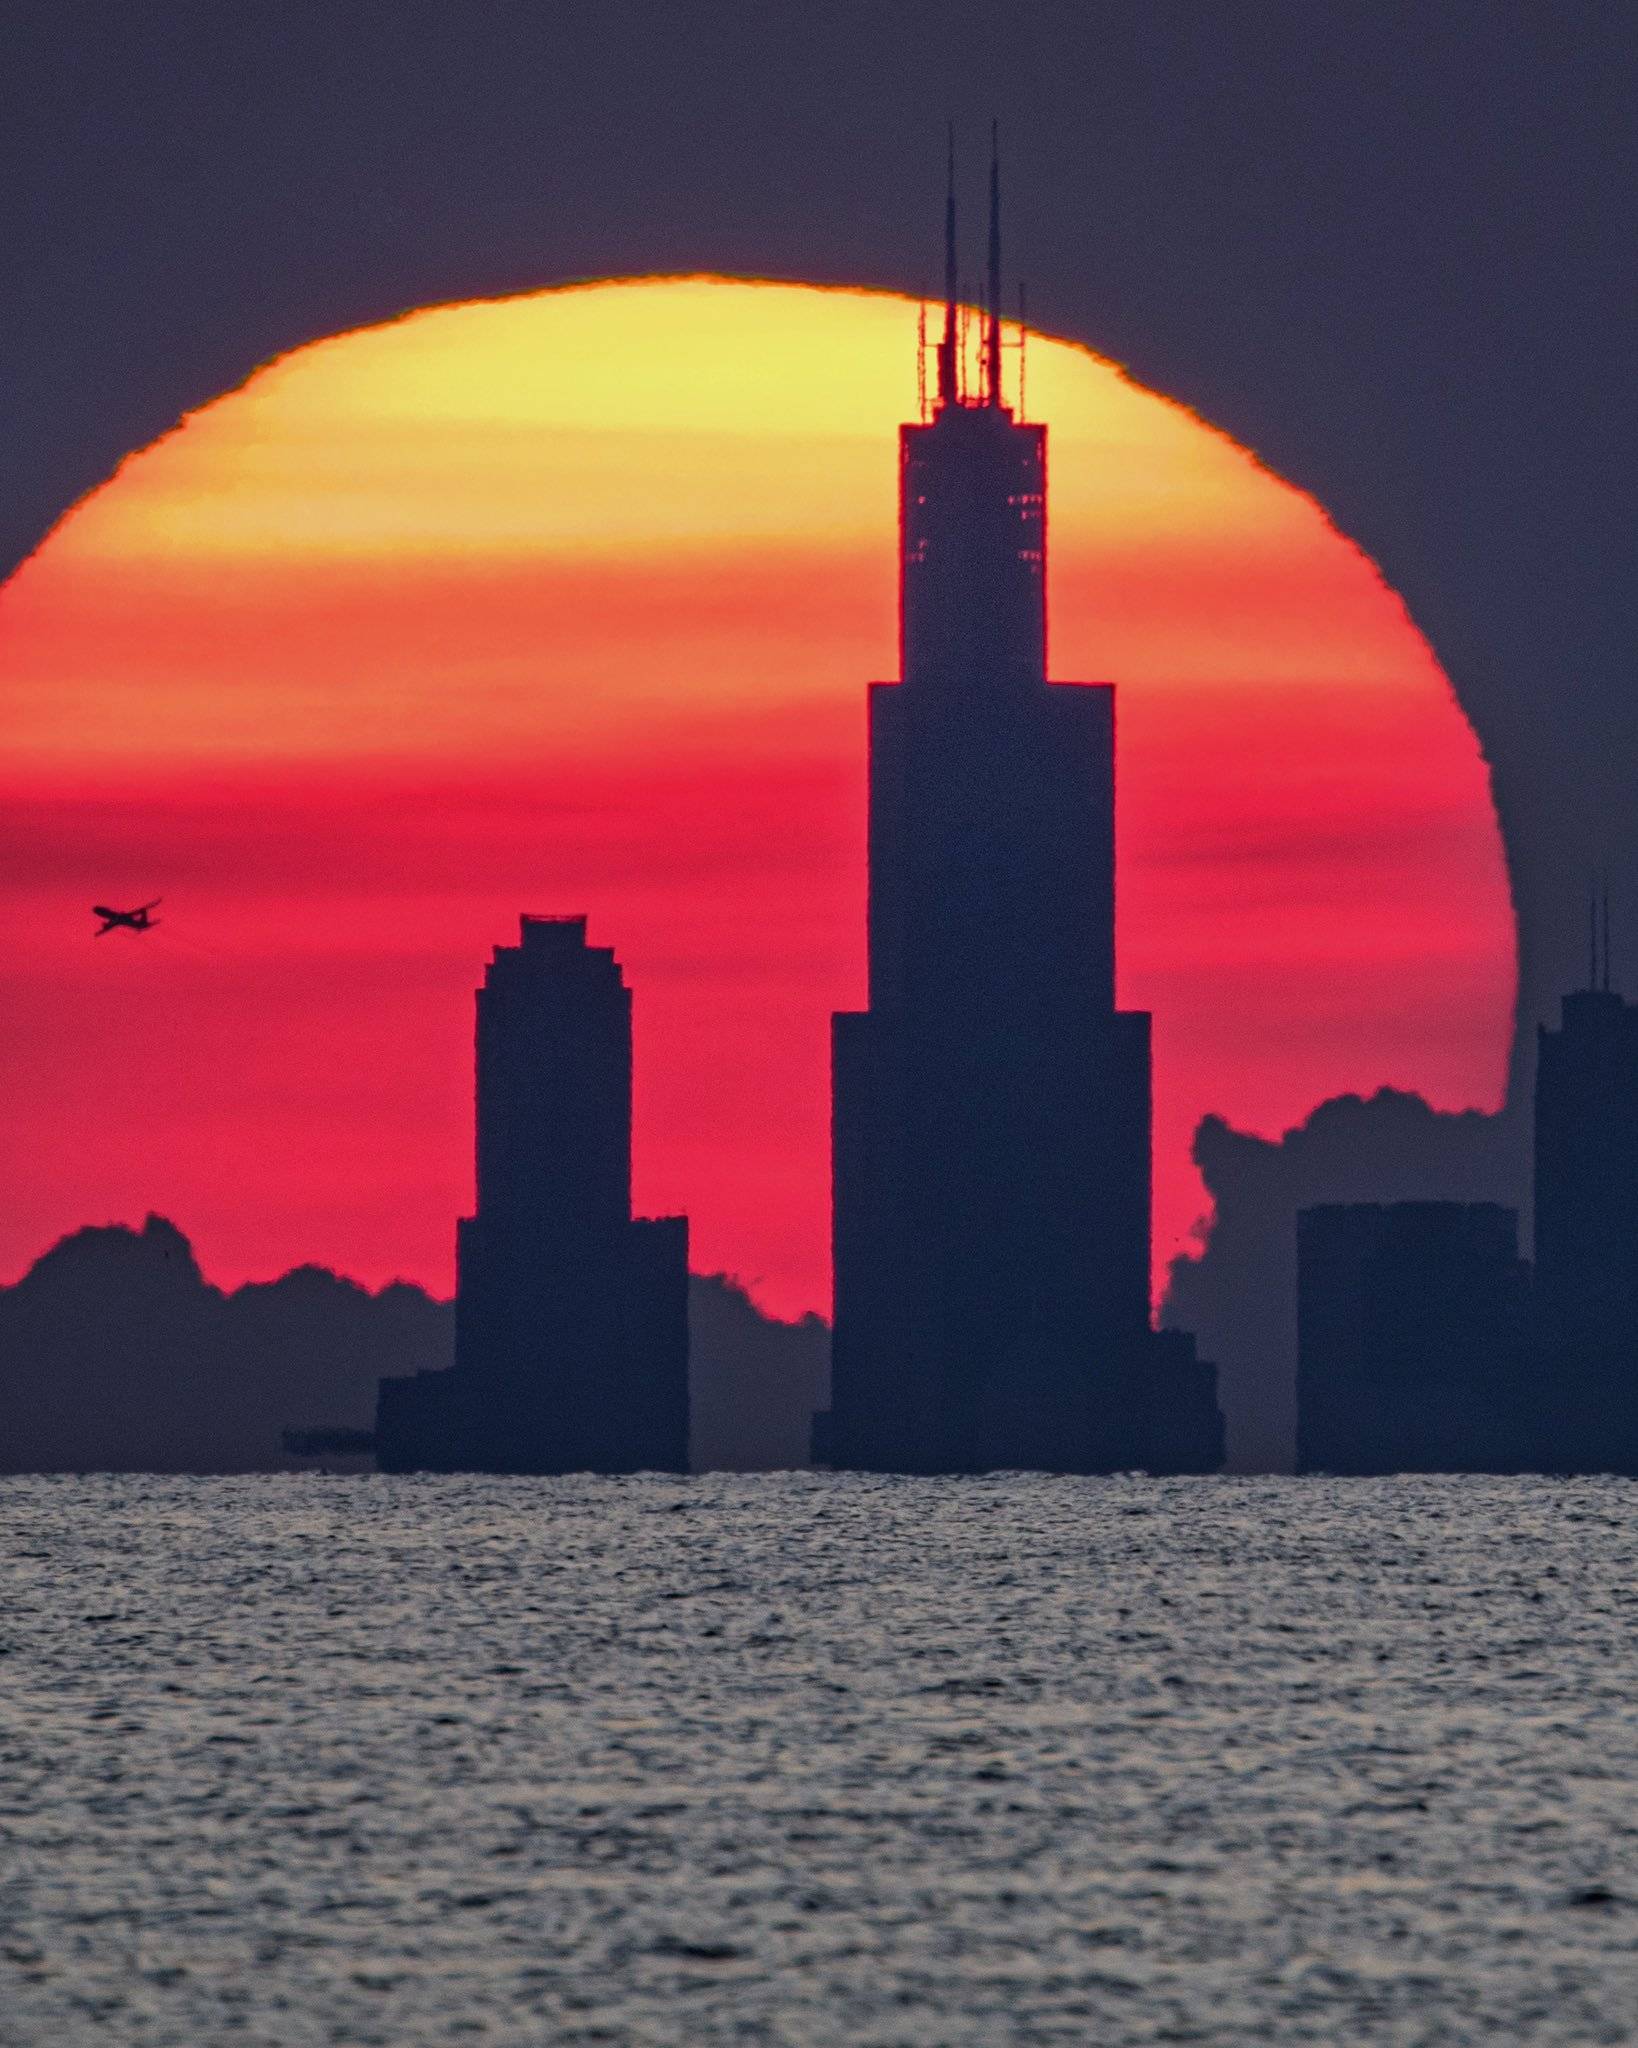 Willis (Sears) Tower in front of the setting sun - Chicago skyline by Tom Jones @tomjones_foto